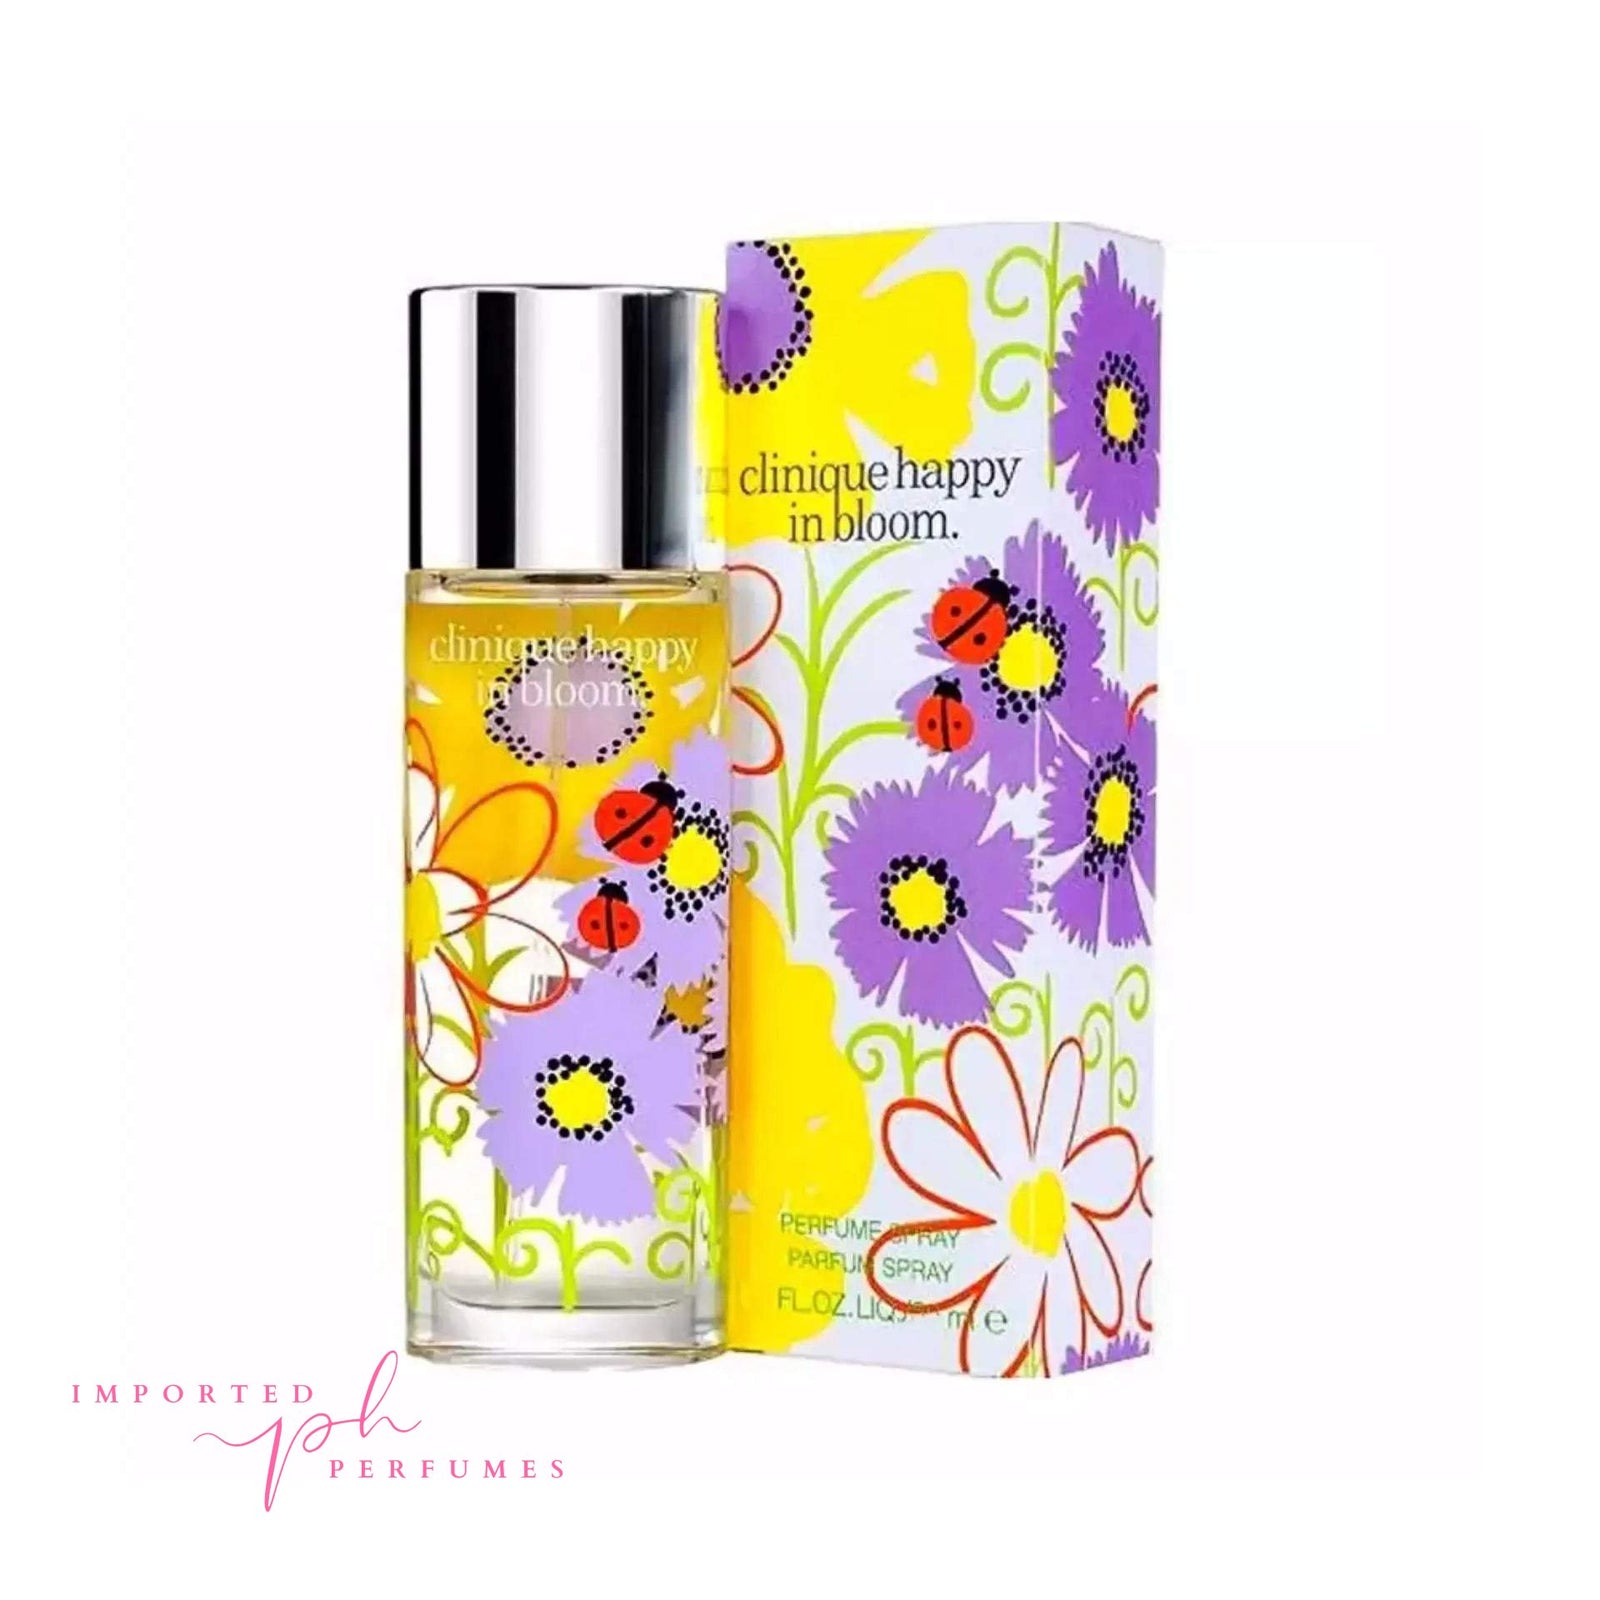 Clinique Happy In Bloom 2013 - Flowers & Ladybugs 100ml-Imported Perfumes Co-bloom,Clinique,clinique for women,Clinique Happy,women